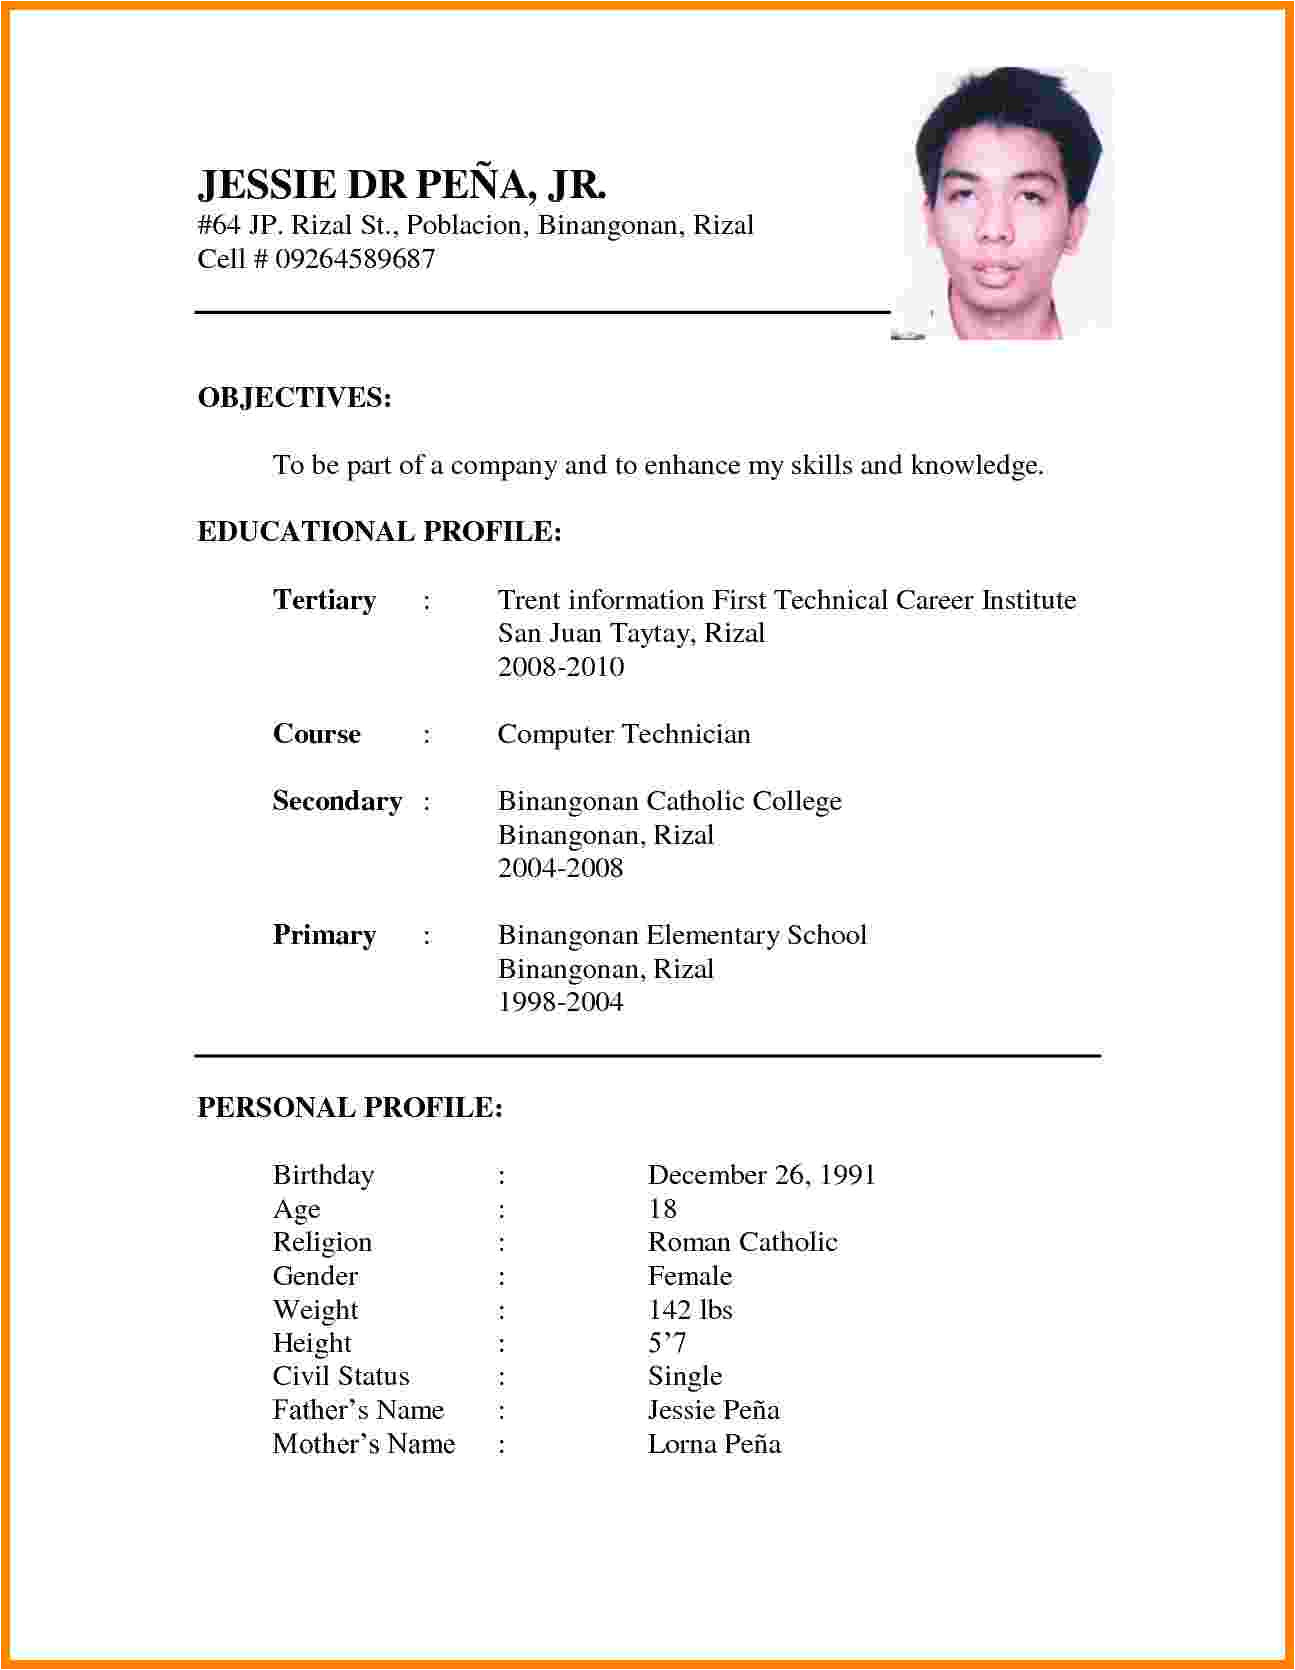 Format Of Resume for Job Application to Download 11 Cv formats Samples for Job theorynpractice